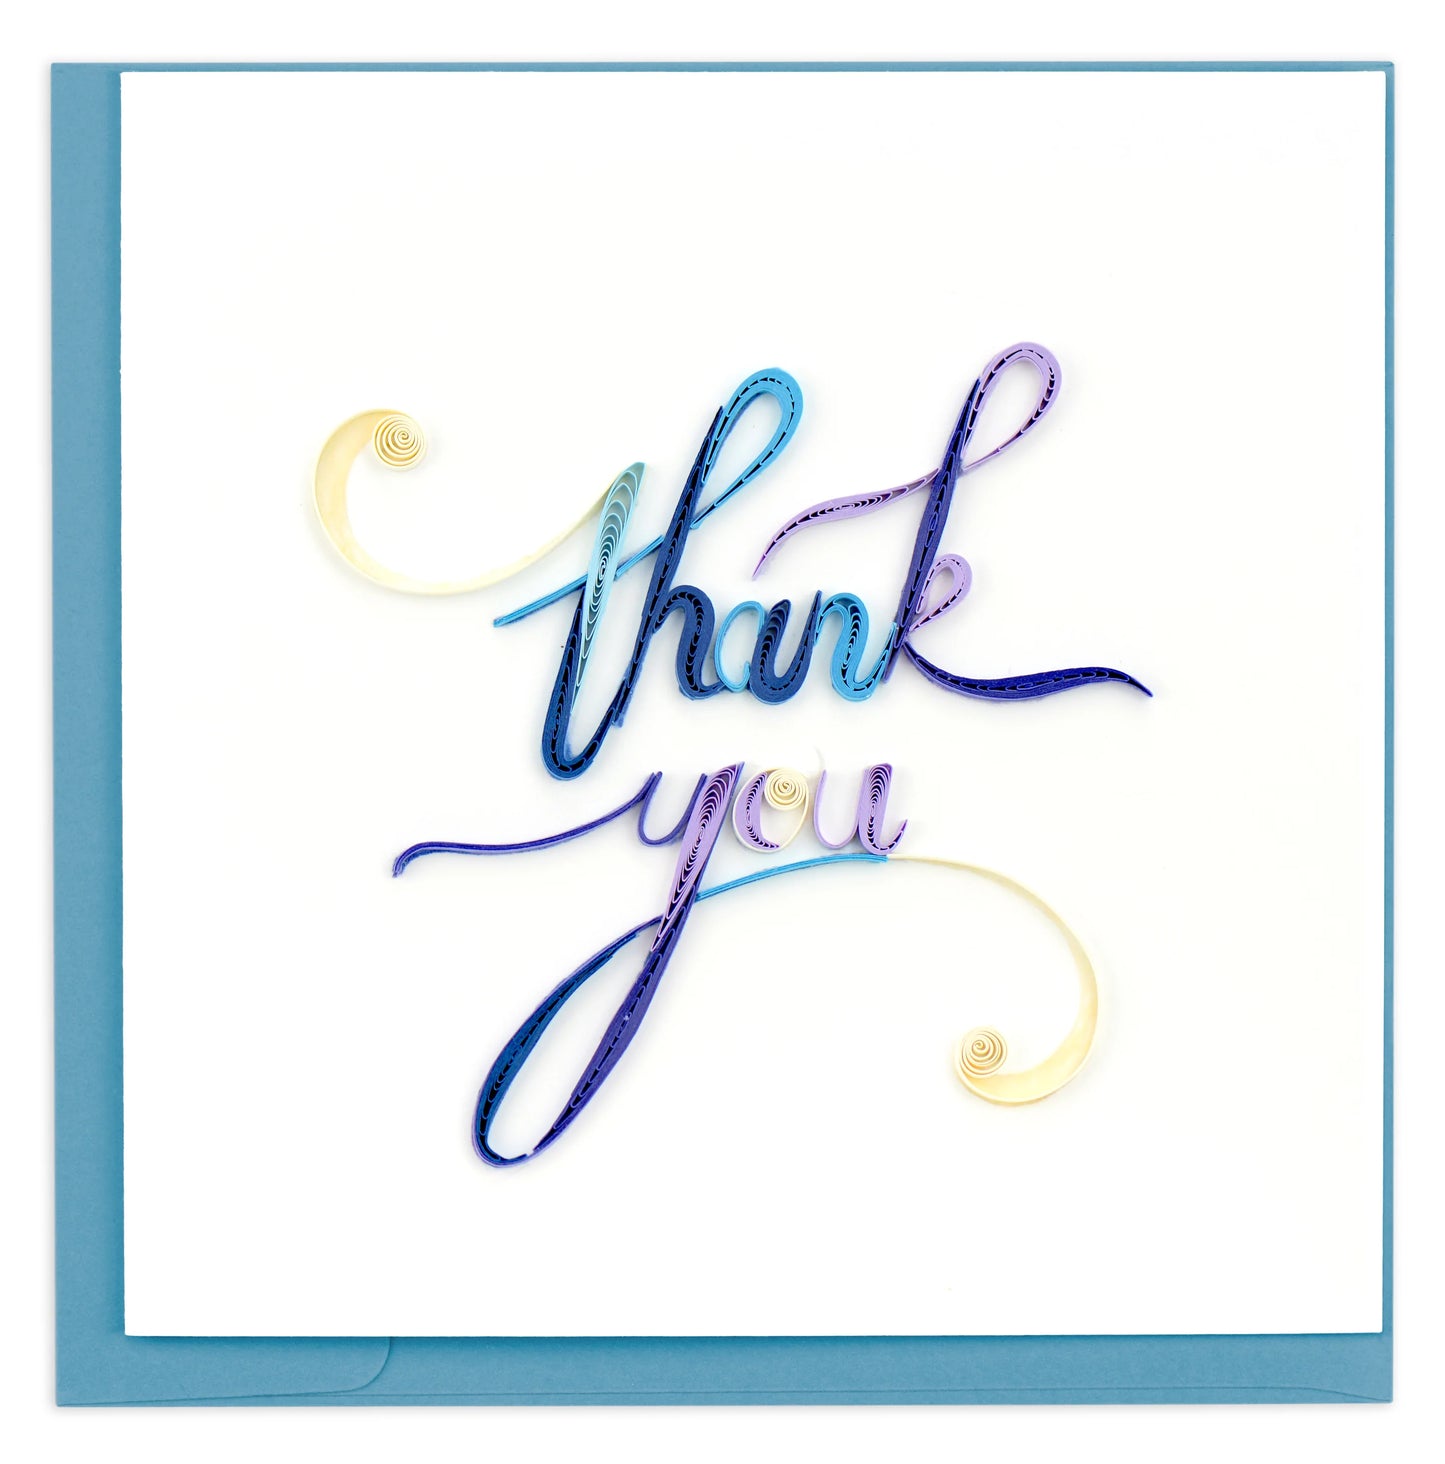 Quilled "Thank You" Greeting Card